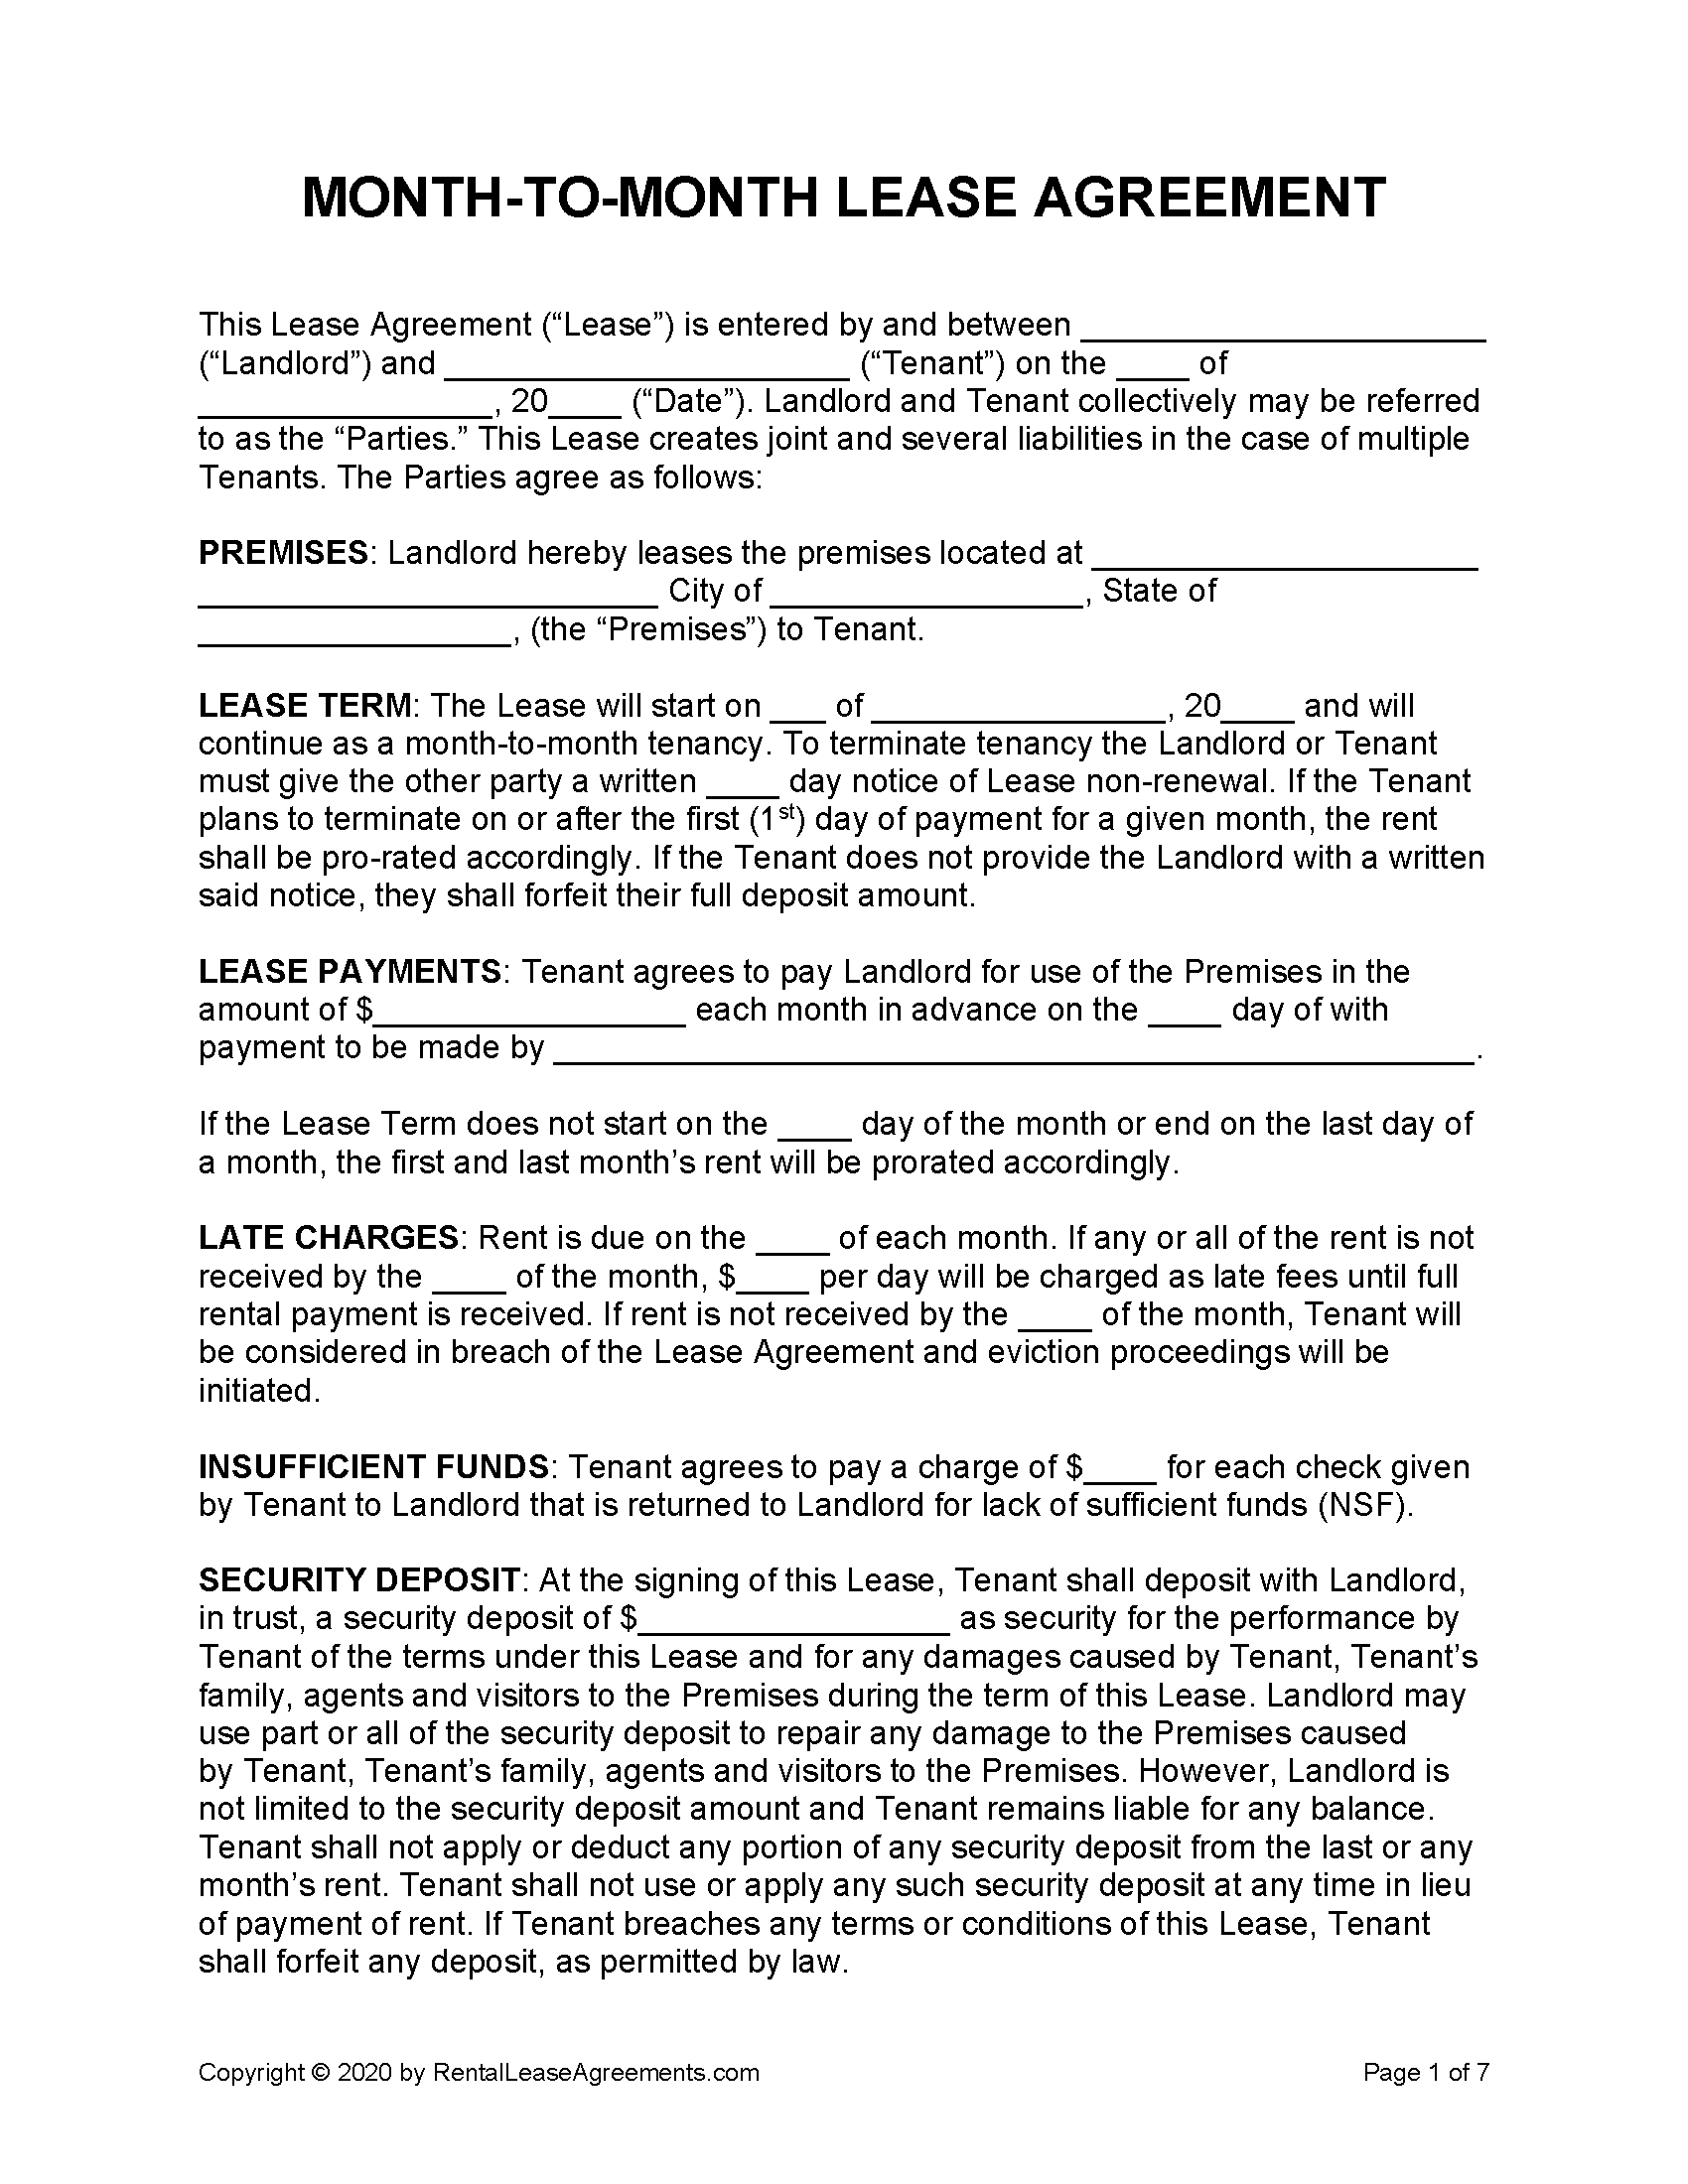 Free Month-to-Month Rental Agreement  PDF - Word For pre contract deposit agreement template